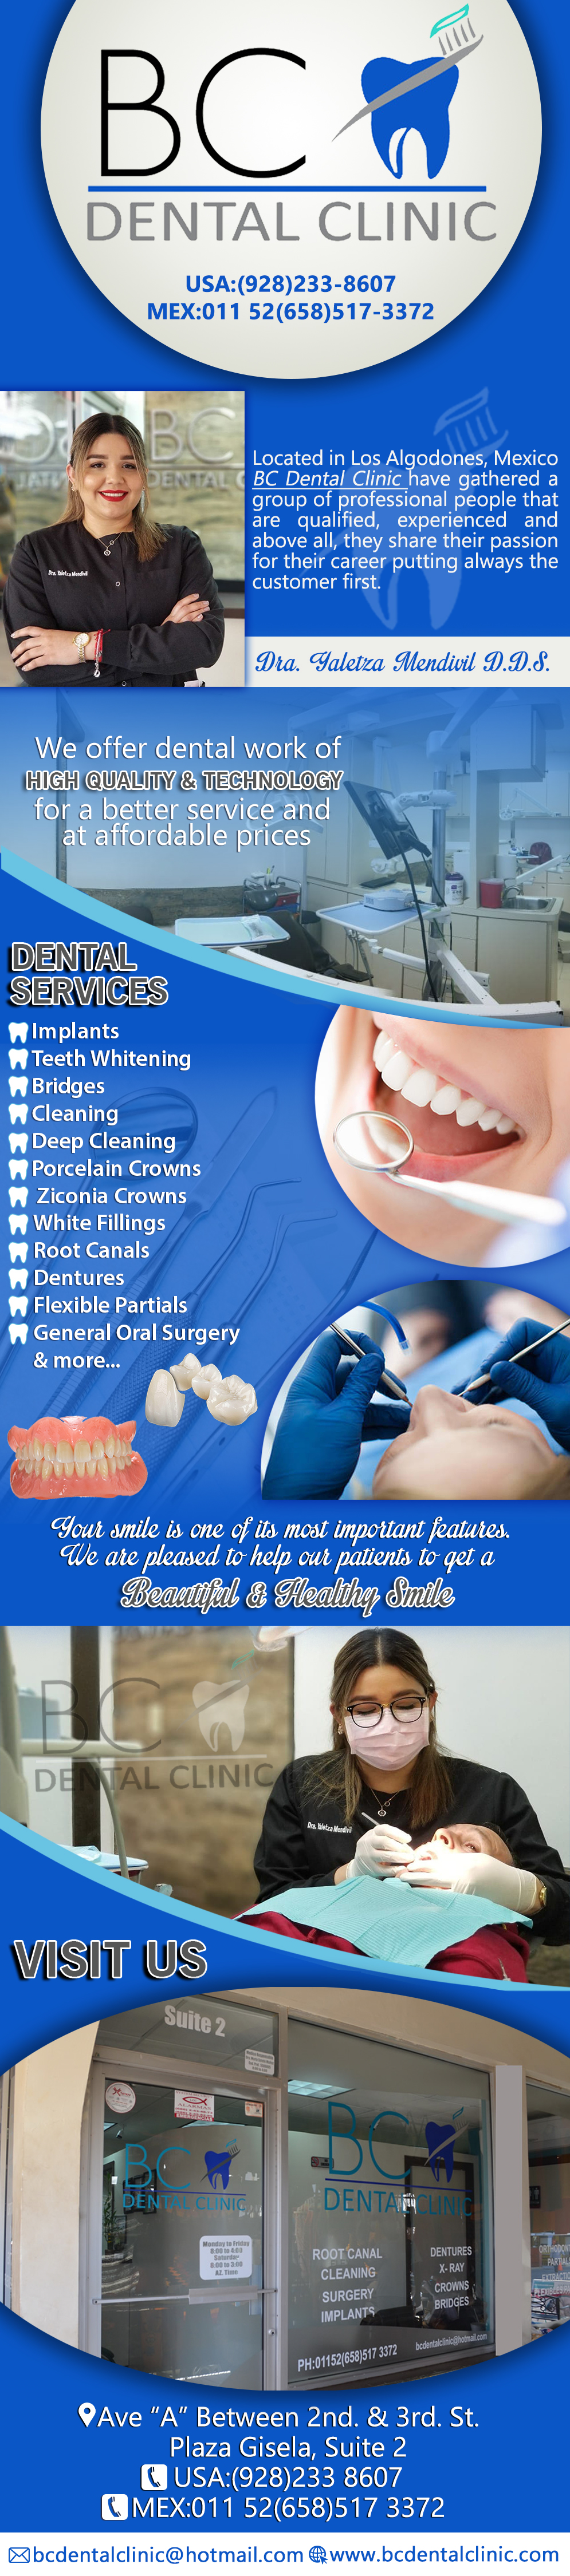 BC Dental Clinic  Yaletza Mendivil DDS-General dentistry, cosmetic dentistry, periodontics, endodontics, orthodontics and dental implants. Bridges °X-Rays °Porcelain Veneers °Metal Crowns °Dental Bonding °Deep Cleaning °Denture Repair °Traditional Acrylic Dentures °Prescriptions °Root Canals °Metal Bridges °White Fillings °Root Canal Therapy Relines (Hard or Soft) °General Oral Surgeries °Porcelain Crowns °Zirconia Crowns °Flexible Partials °Composite Posts °Teeth Whitening °Extractions °Flexible Parials Implants °Porcelain Veneers °Wisdom Tooth Extractions °Metal Posts °Traditional Cleaning °MetalAcrylic Partials °Immediate Upper and Lower Dentures (Alveoplasty)            